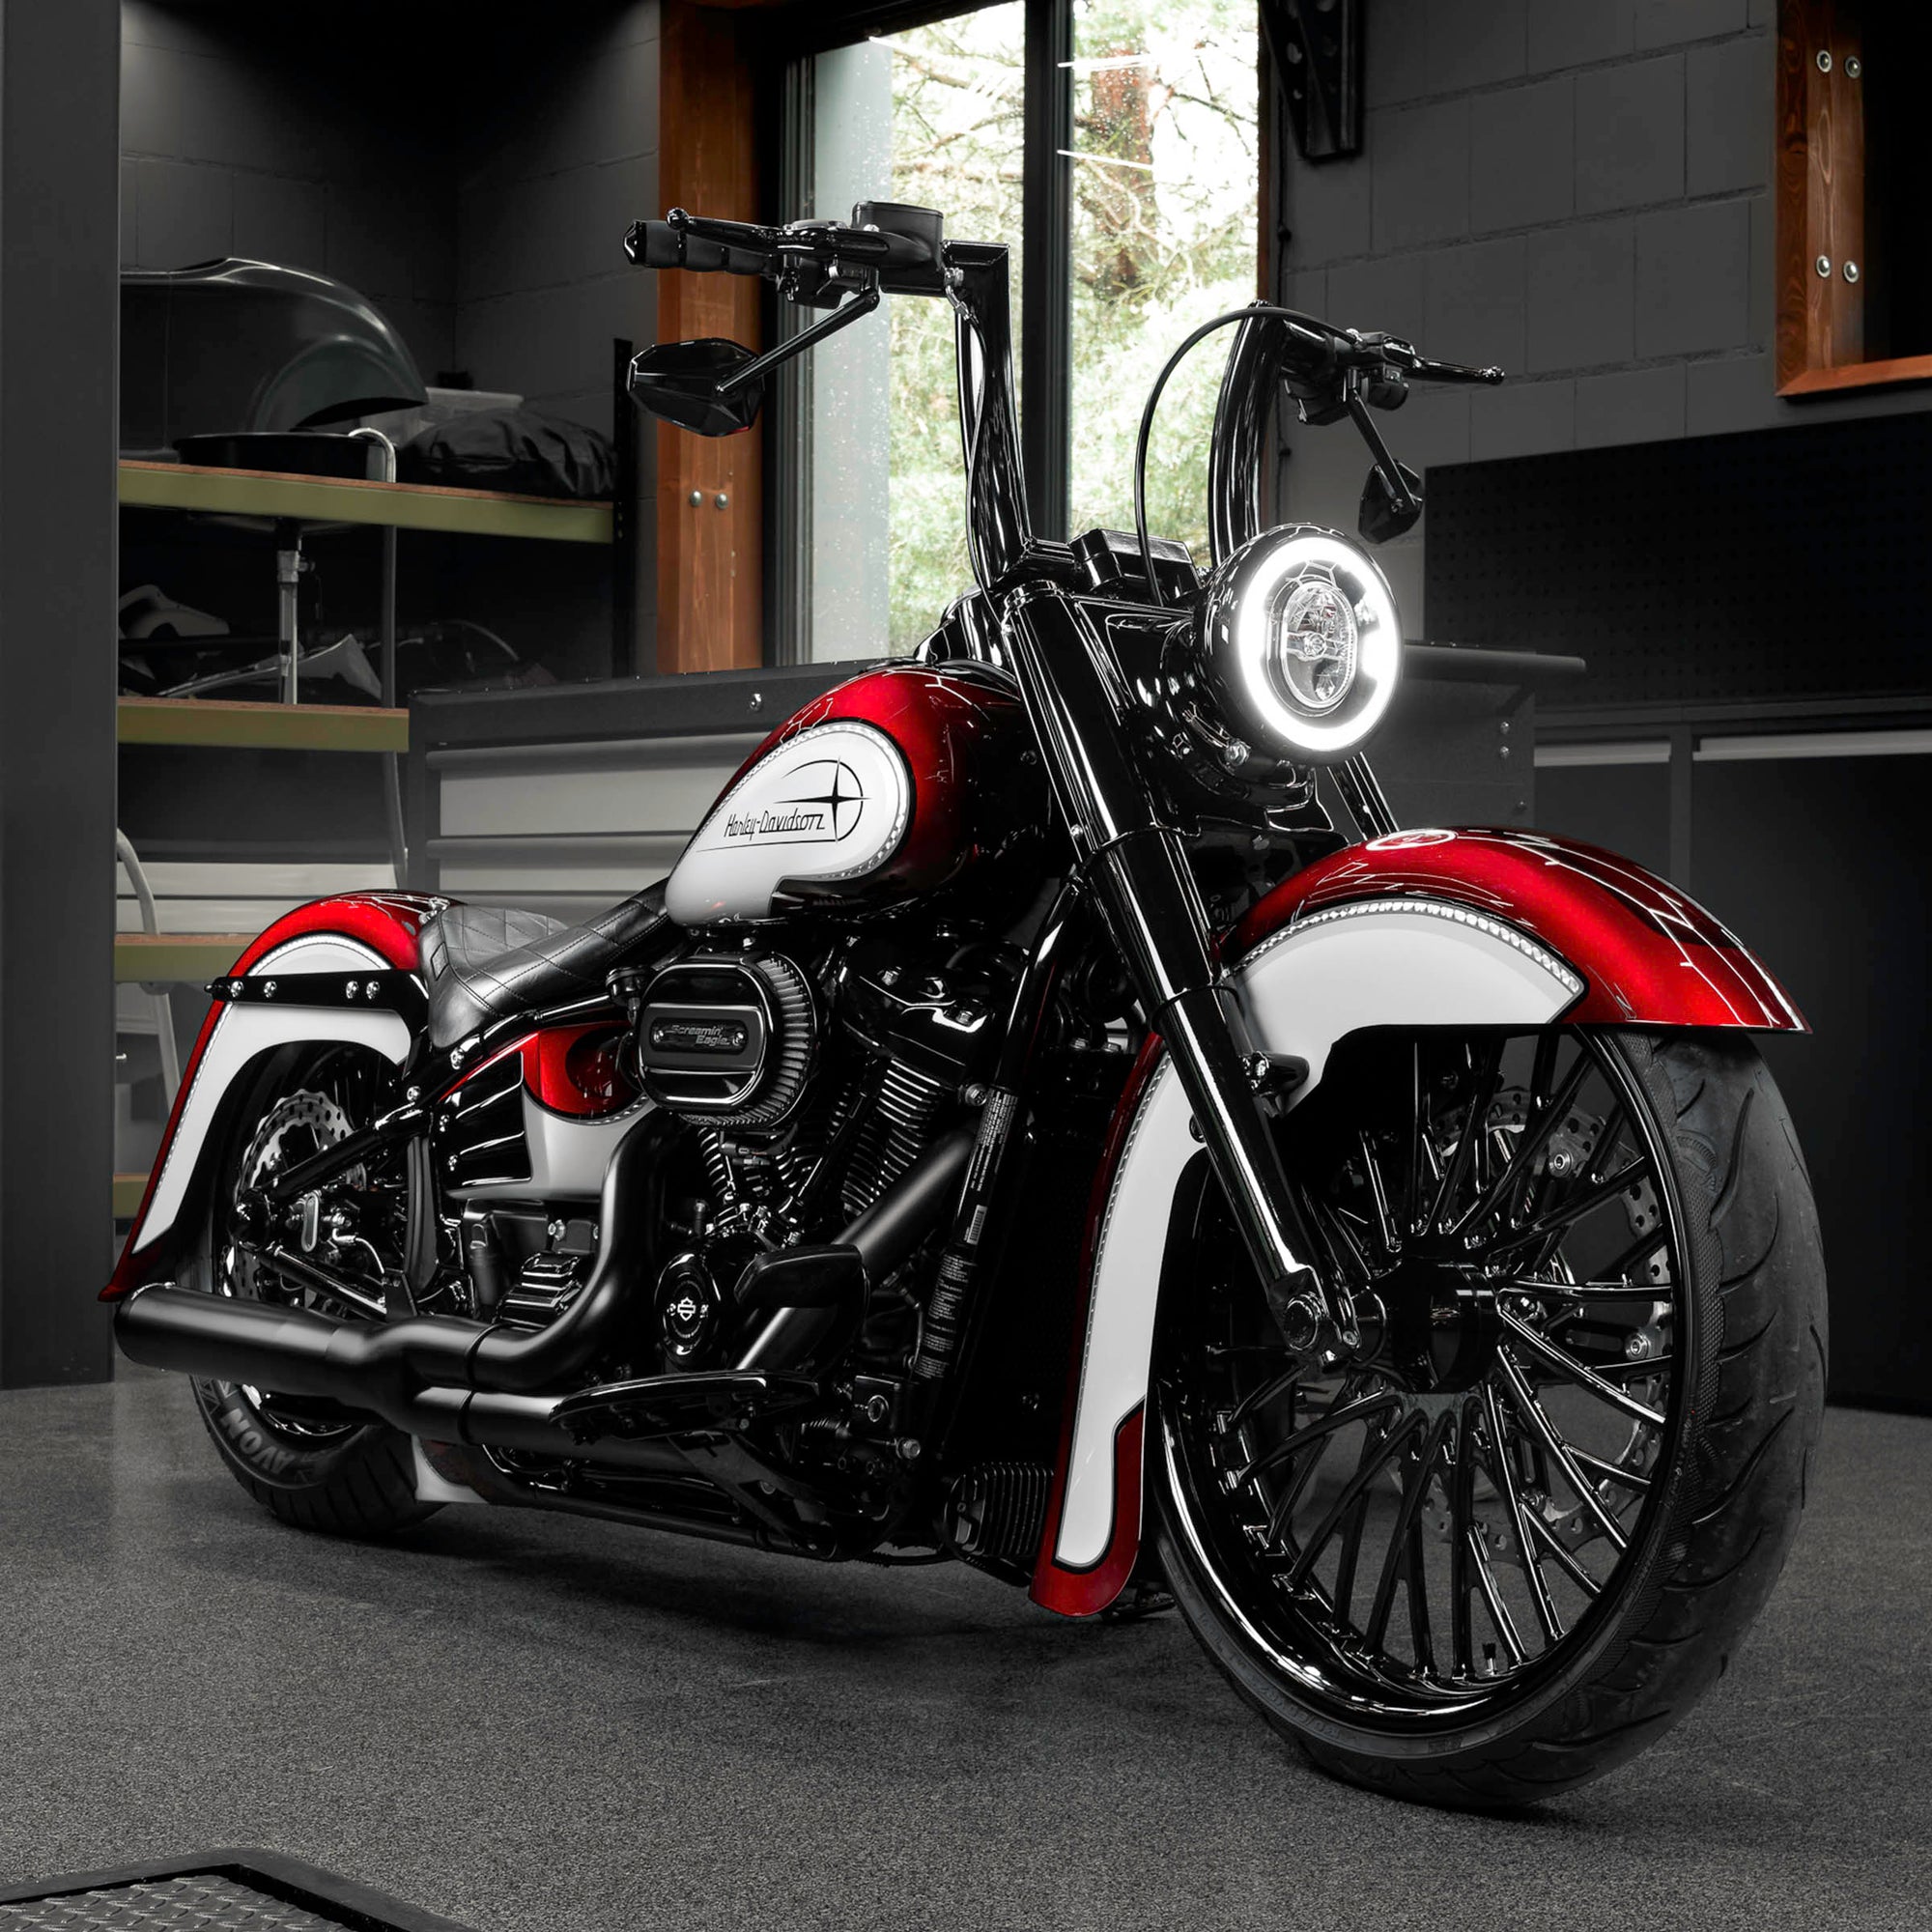 Modified Harley Davidson Heritage motorcycle with Killer Custom parts from the front in a modern bike shop